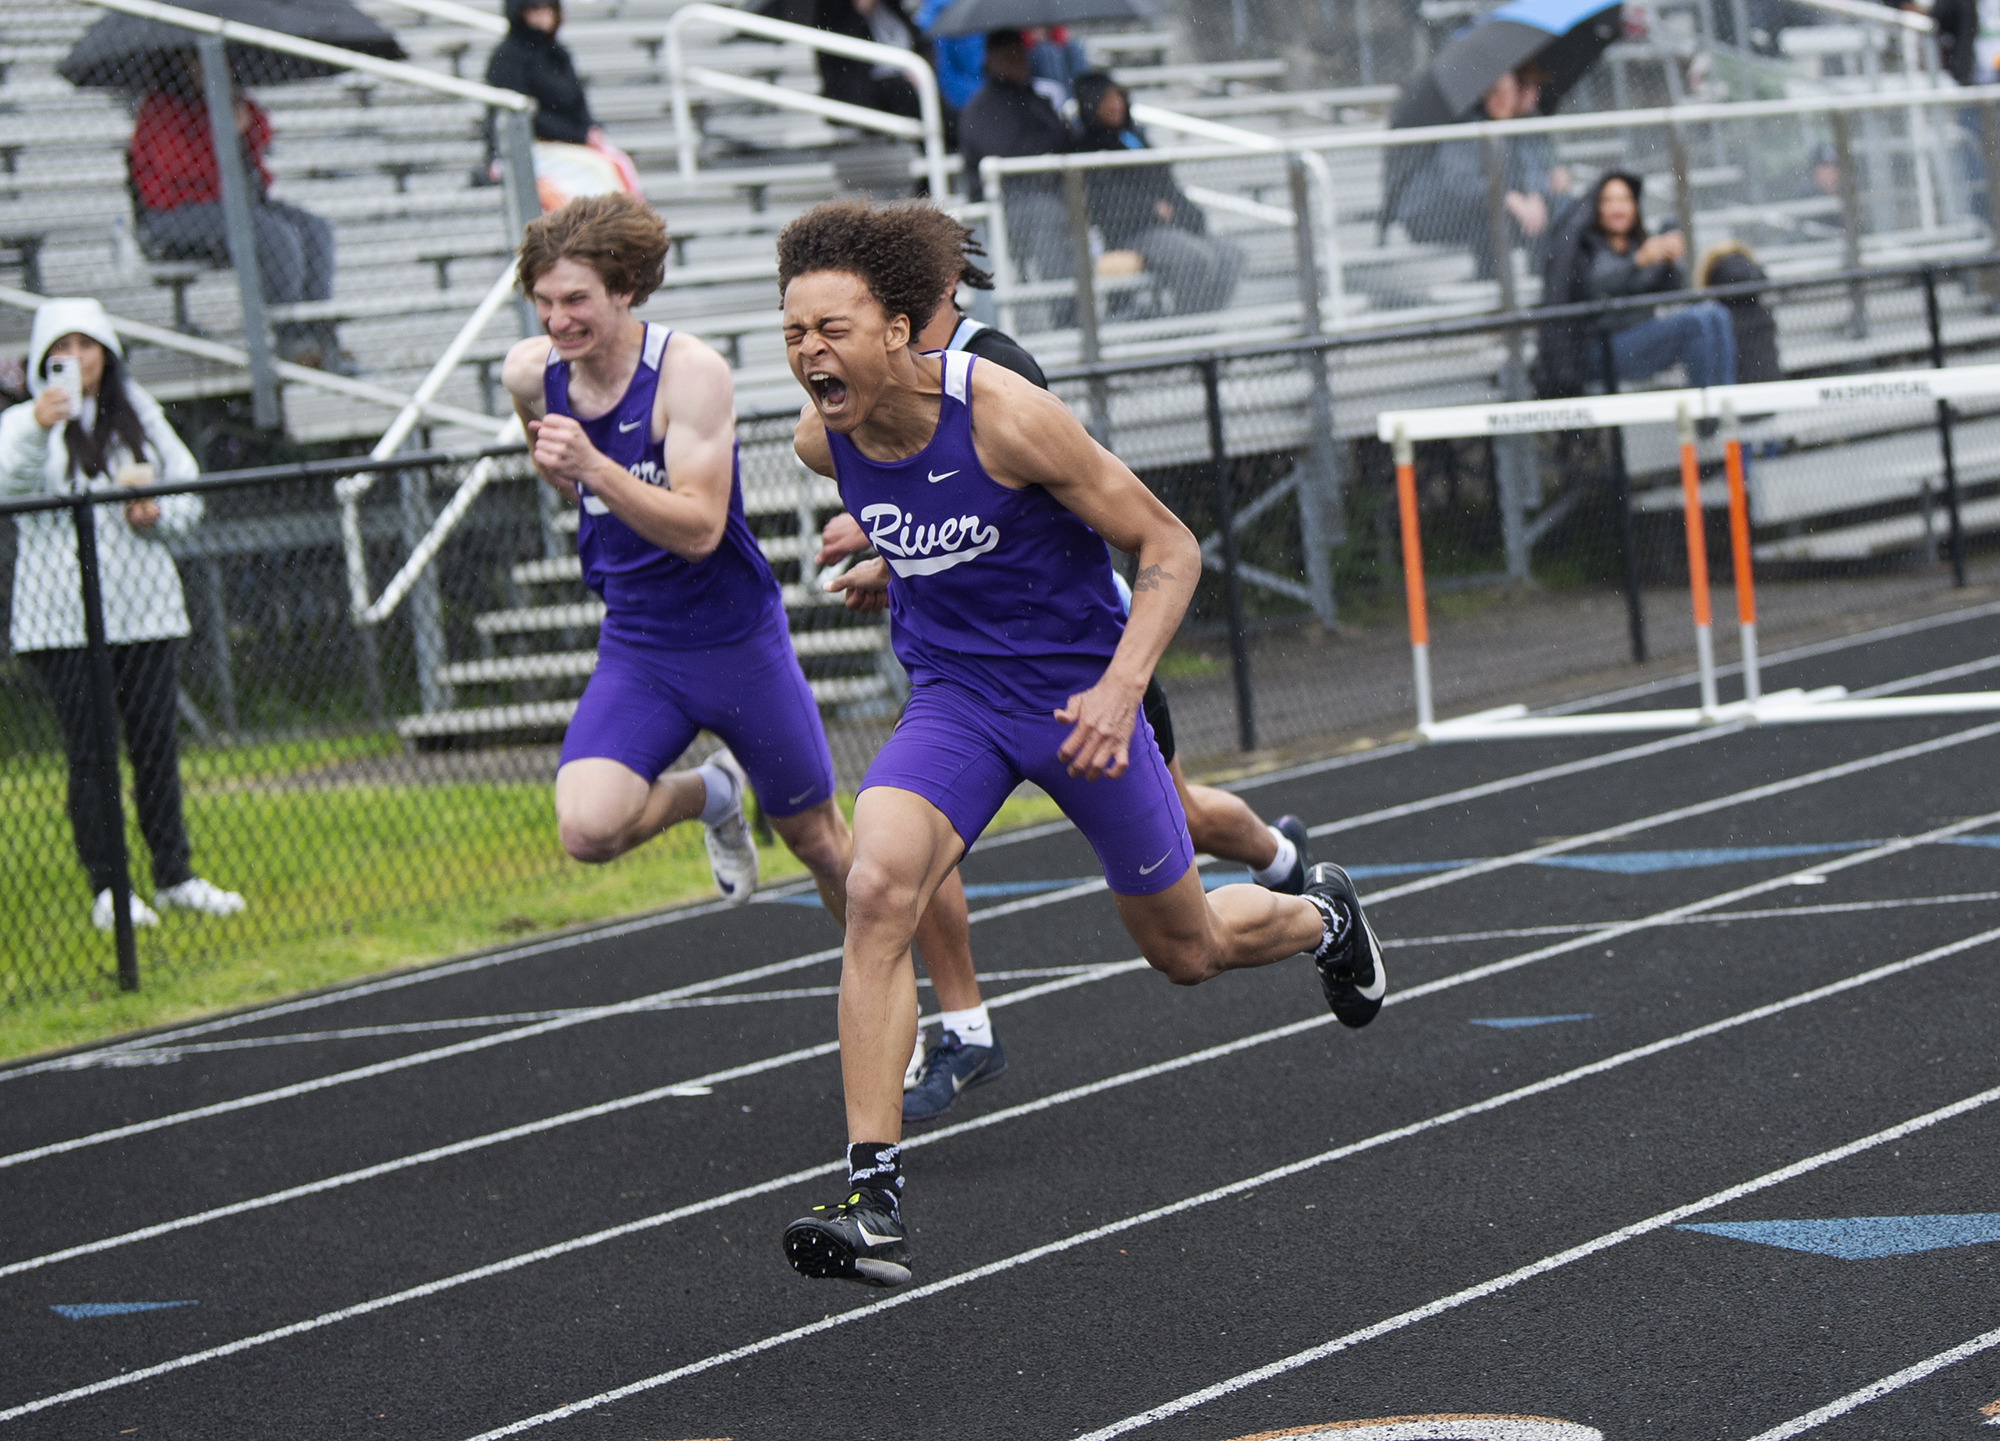 Columbia River's Dakari Richmond screams out as he pushes for the finish line to win the boys 110-meter hurdles at the 2A sub-district track and field meet at Washougal High School on May 13, 2022.